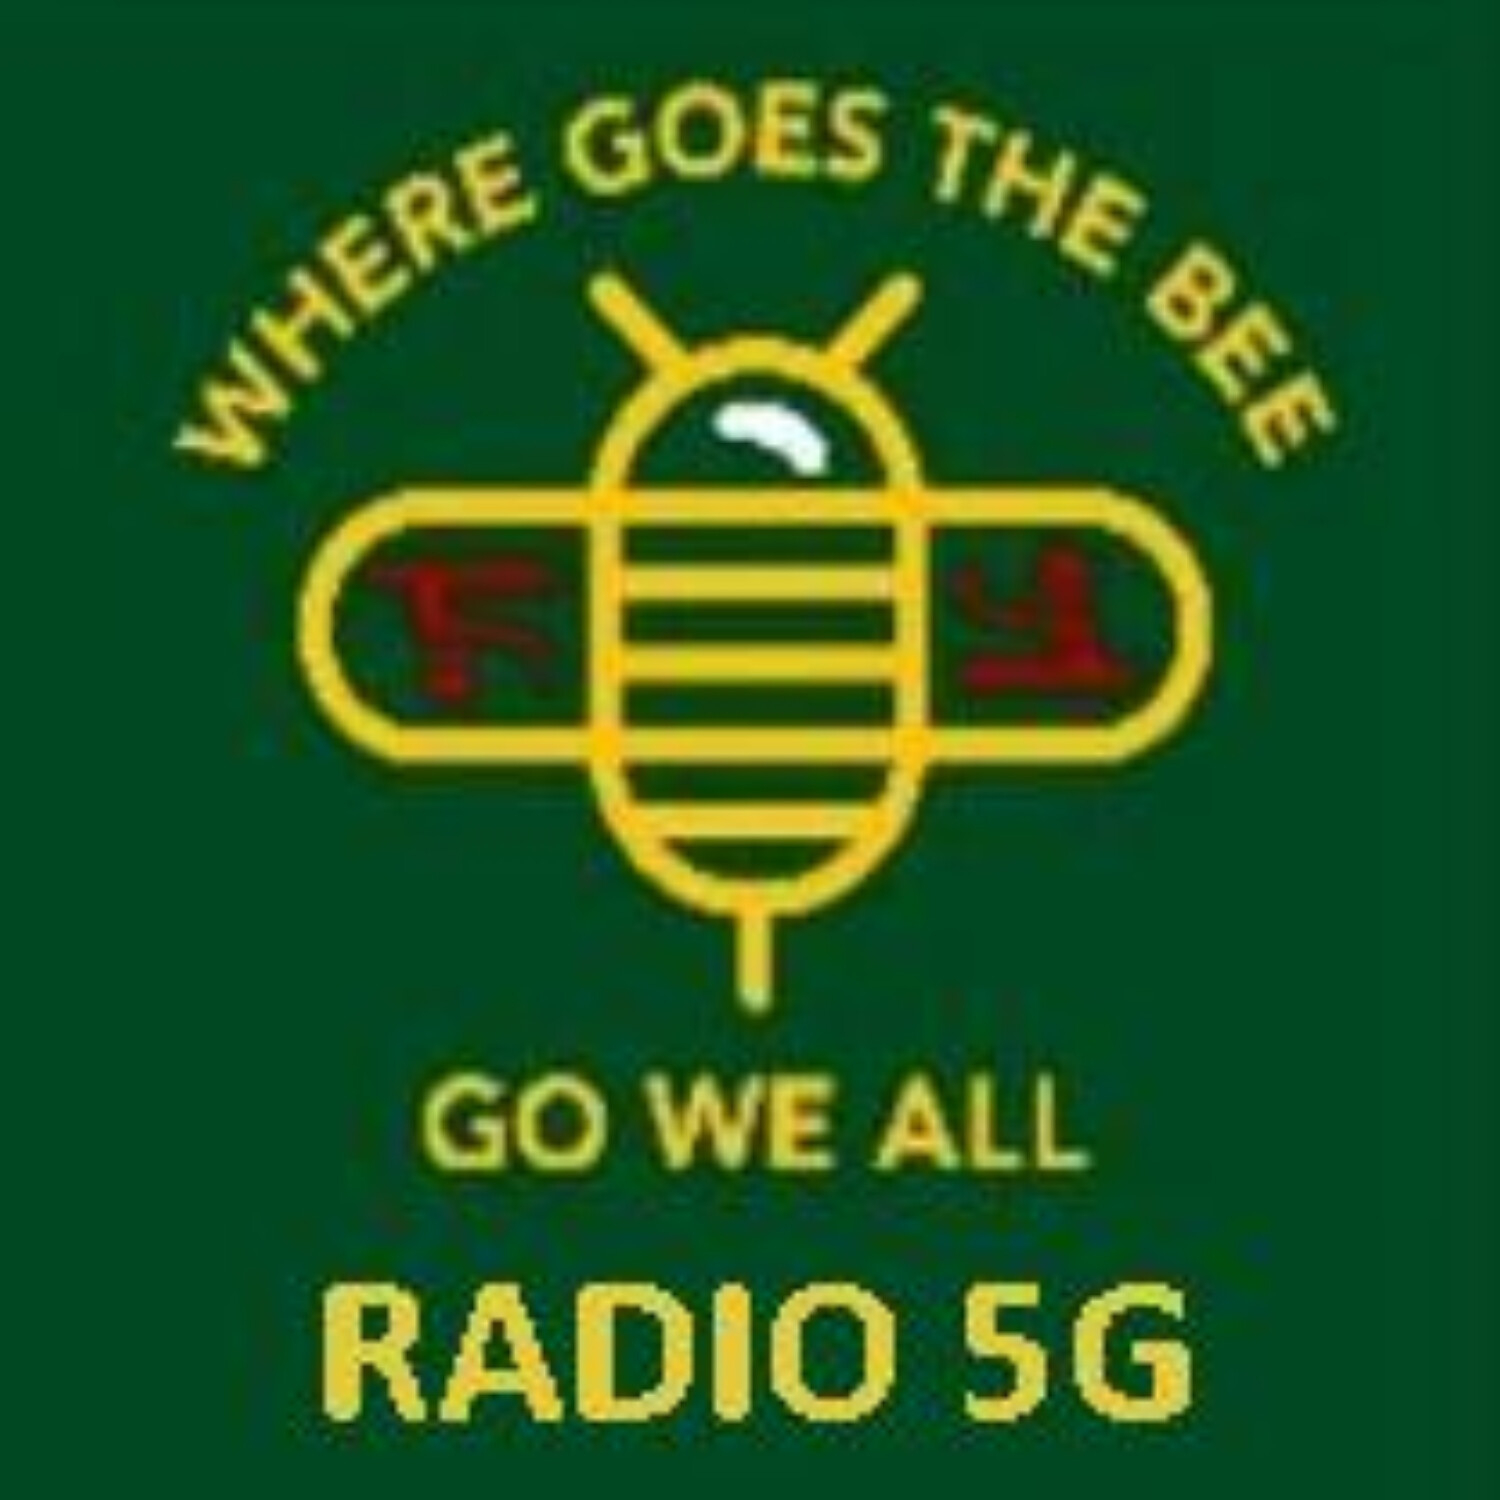 “RADIO 5G” 12/29/21 - NIH Document Connecting 5G to Pandemic